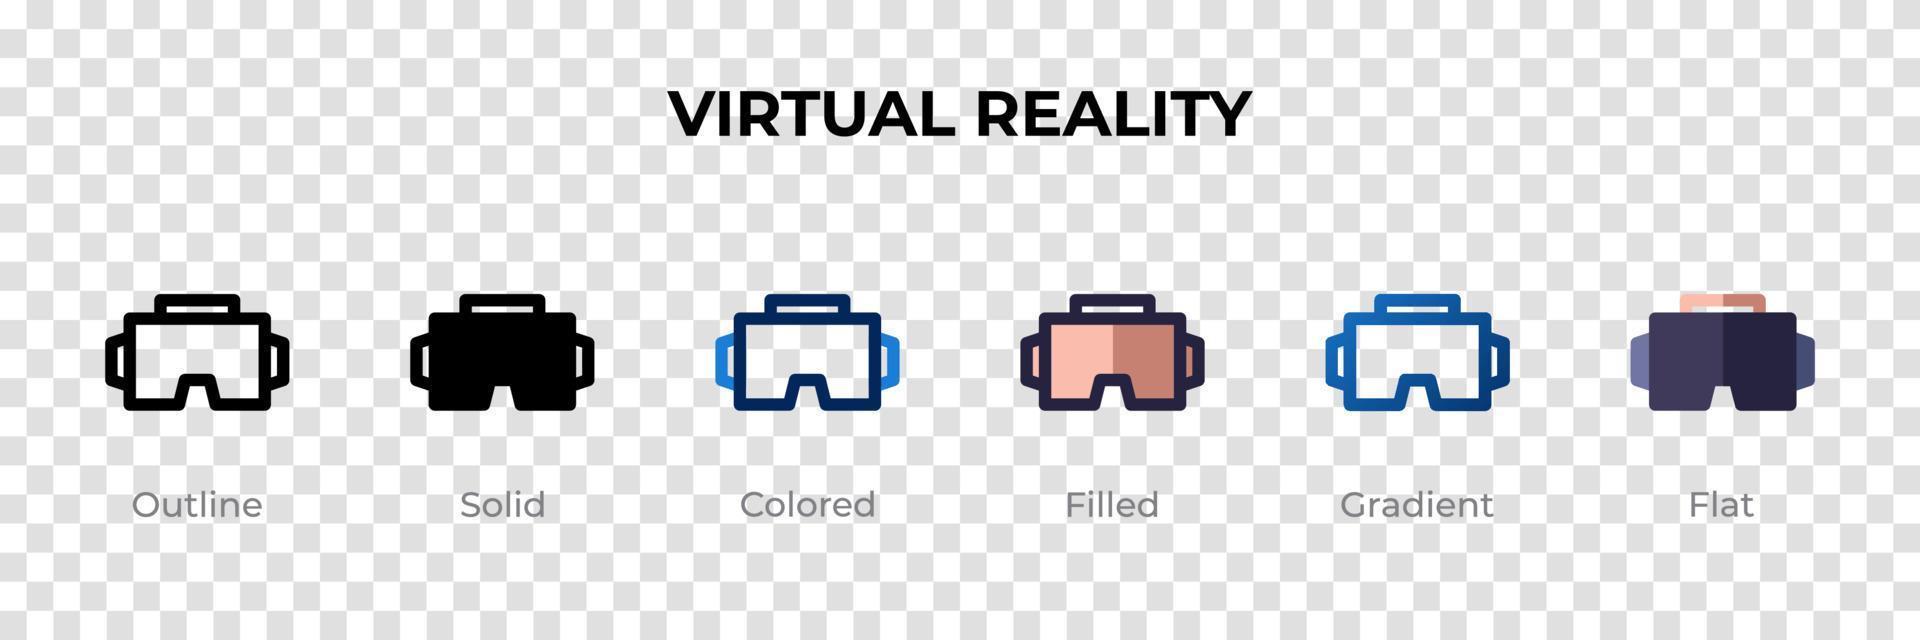 Virtual Reality icon in different style. Virtual Reality vector icons designed in outline, solid, colored, filled, gradient, and flat style. Symbol, logo illustration. Vector illustration